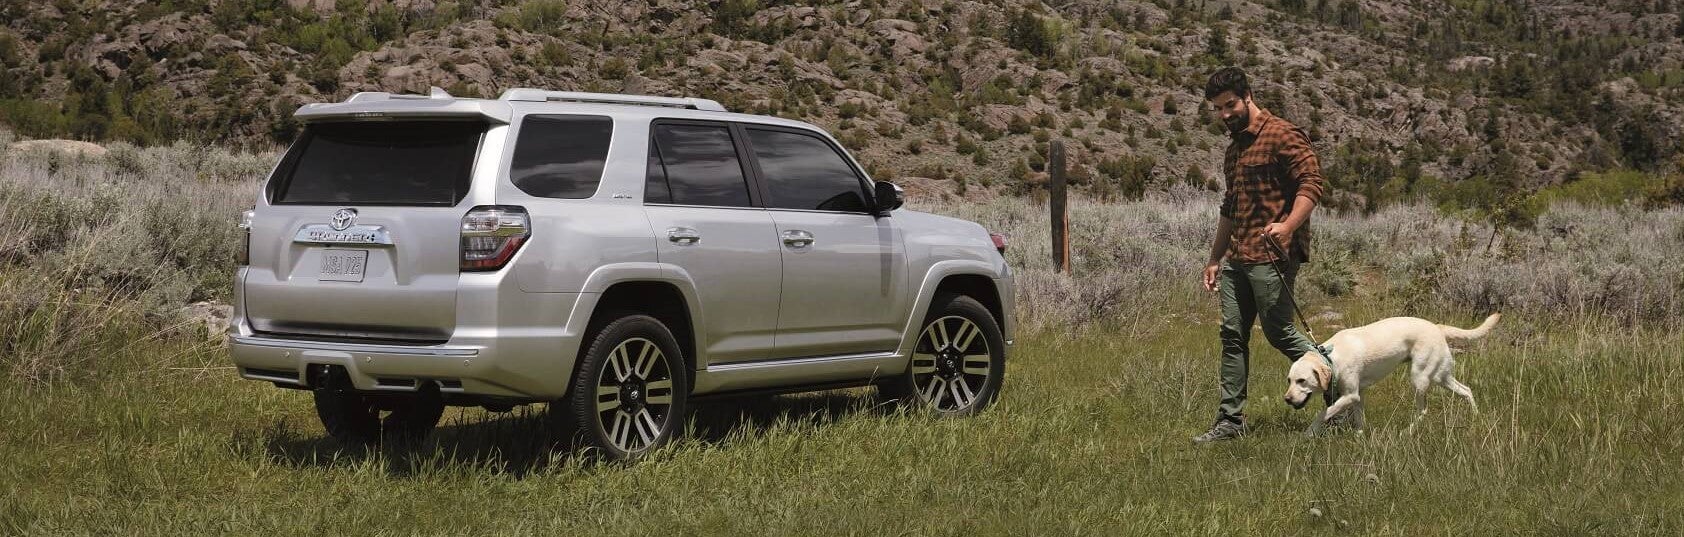 Toyota 4Runner for Sale near Indianapolis IN